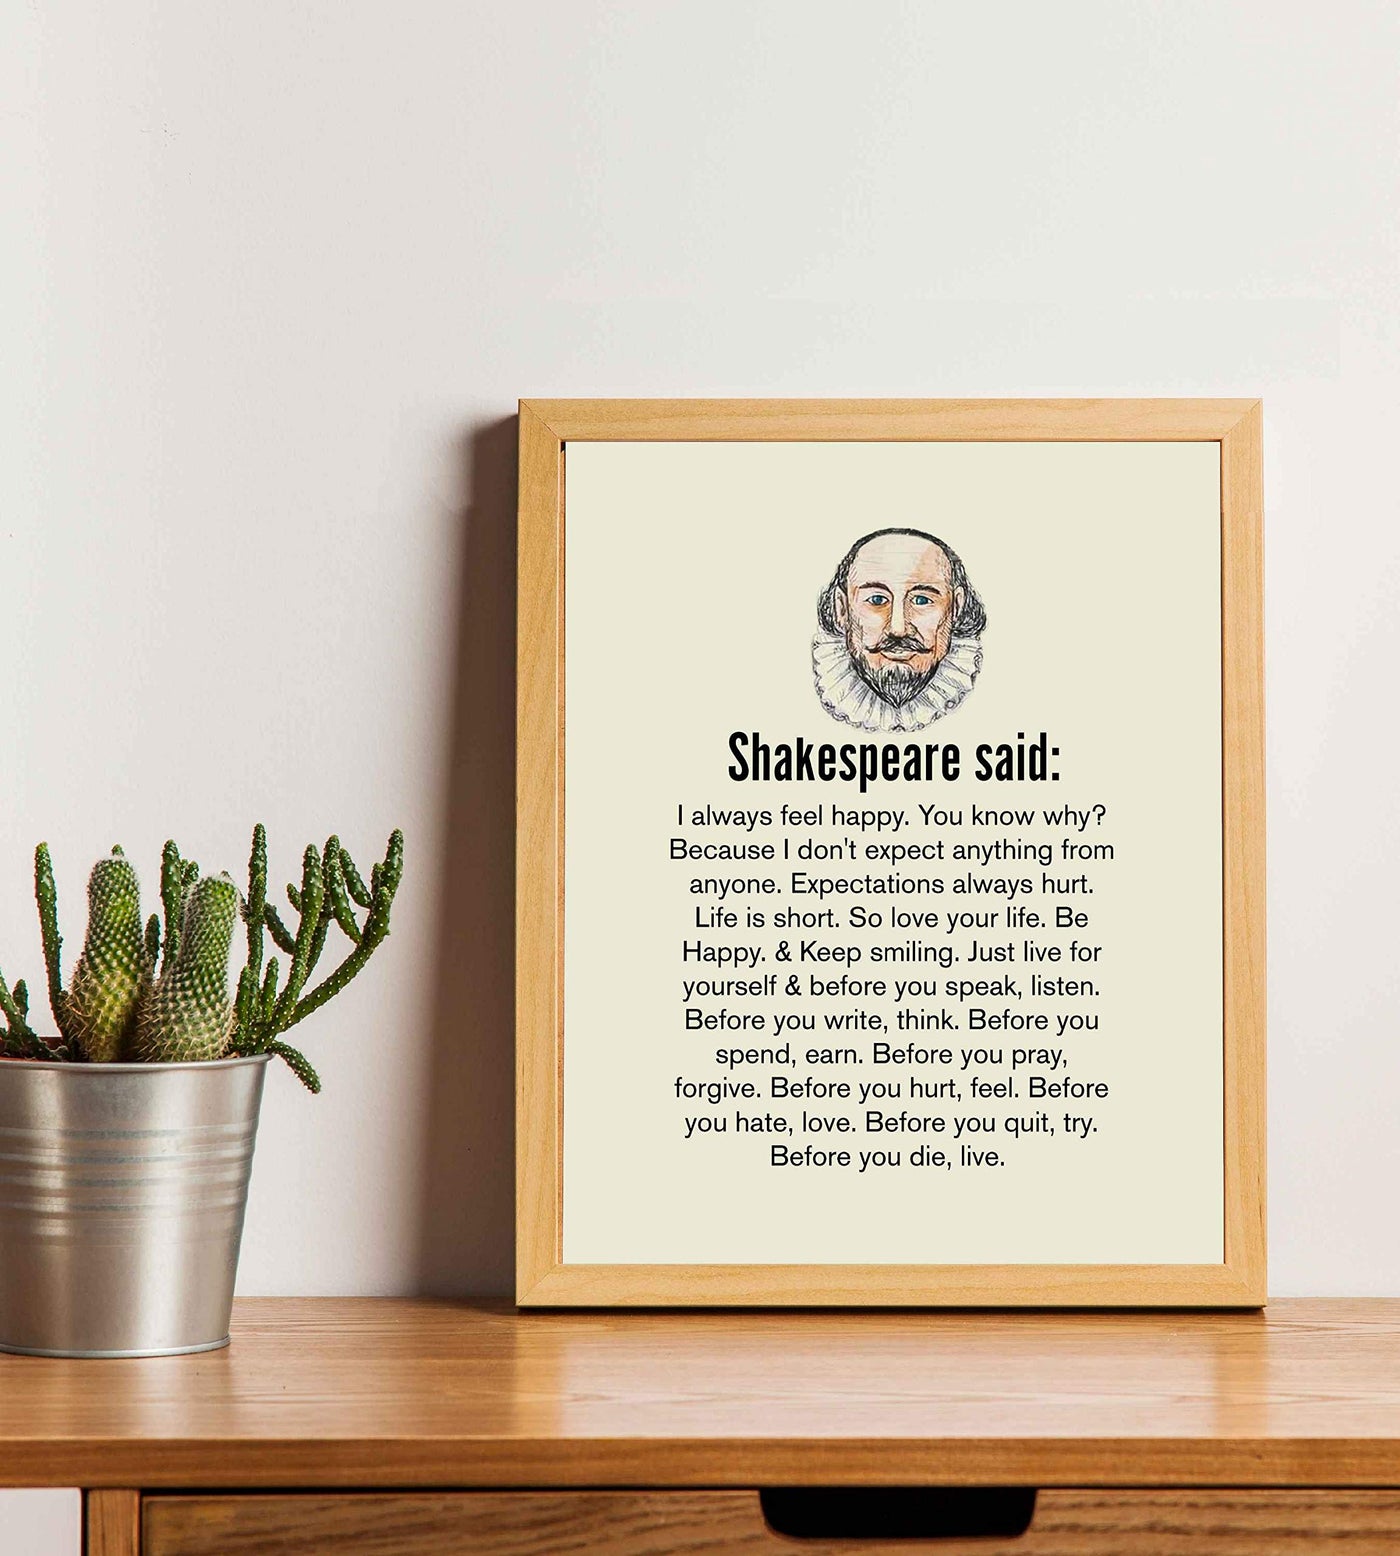 Shakespeare-"I Always Feel Happy"-Inspirational Quotes. Literary Wall Art Sign-8 x 10"-Ready to Frame. Modern Typographic Poster Print w/Shakespeare Image. Perfect Home-Office-Studio-Library D?cor.